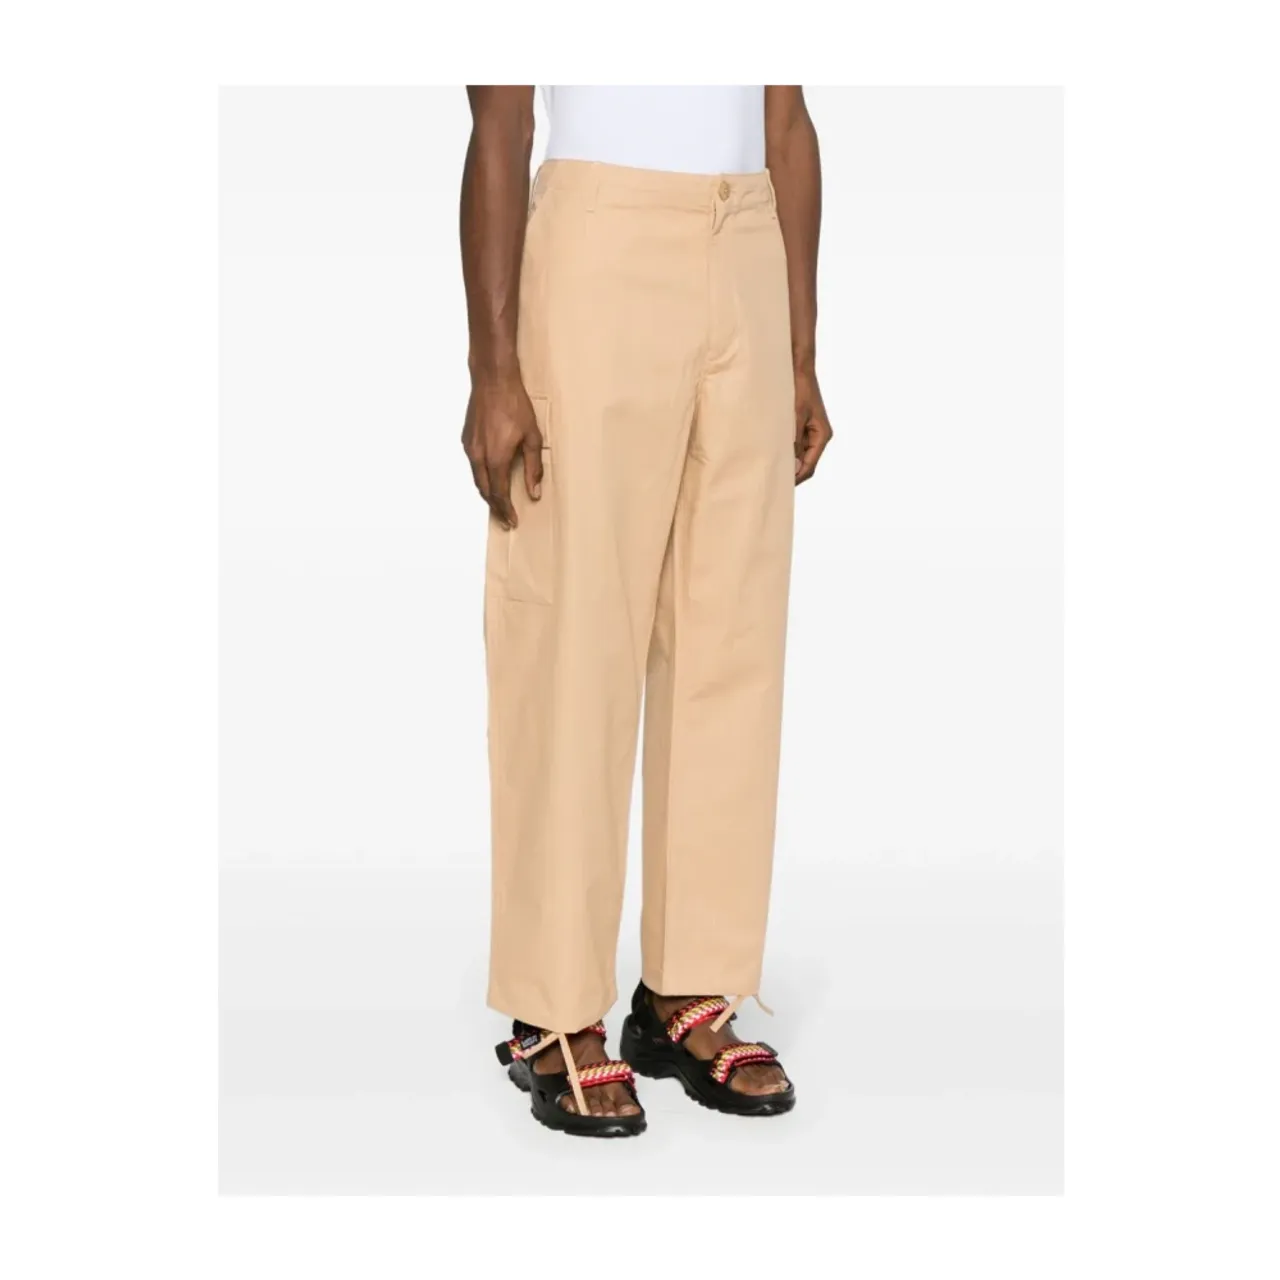 Kenzo , Beige Trousers with Adjustable Drawstrings ,Beige male, Sizes: